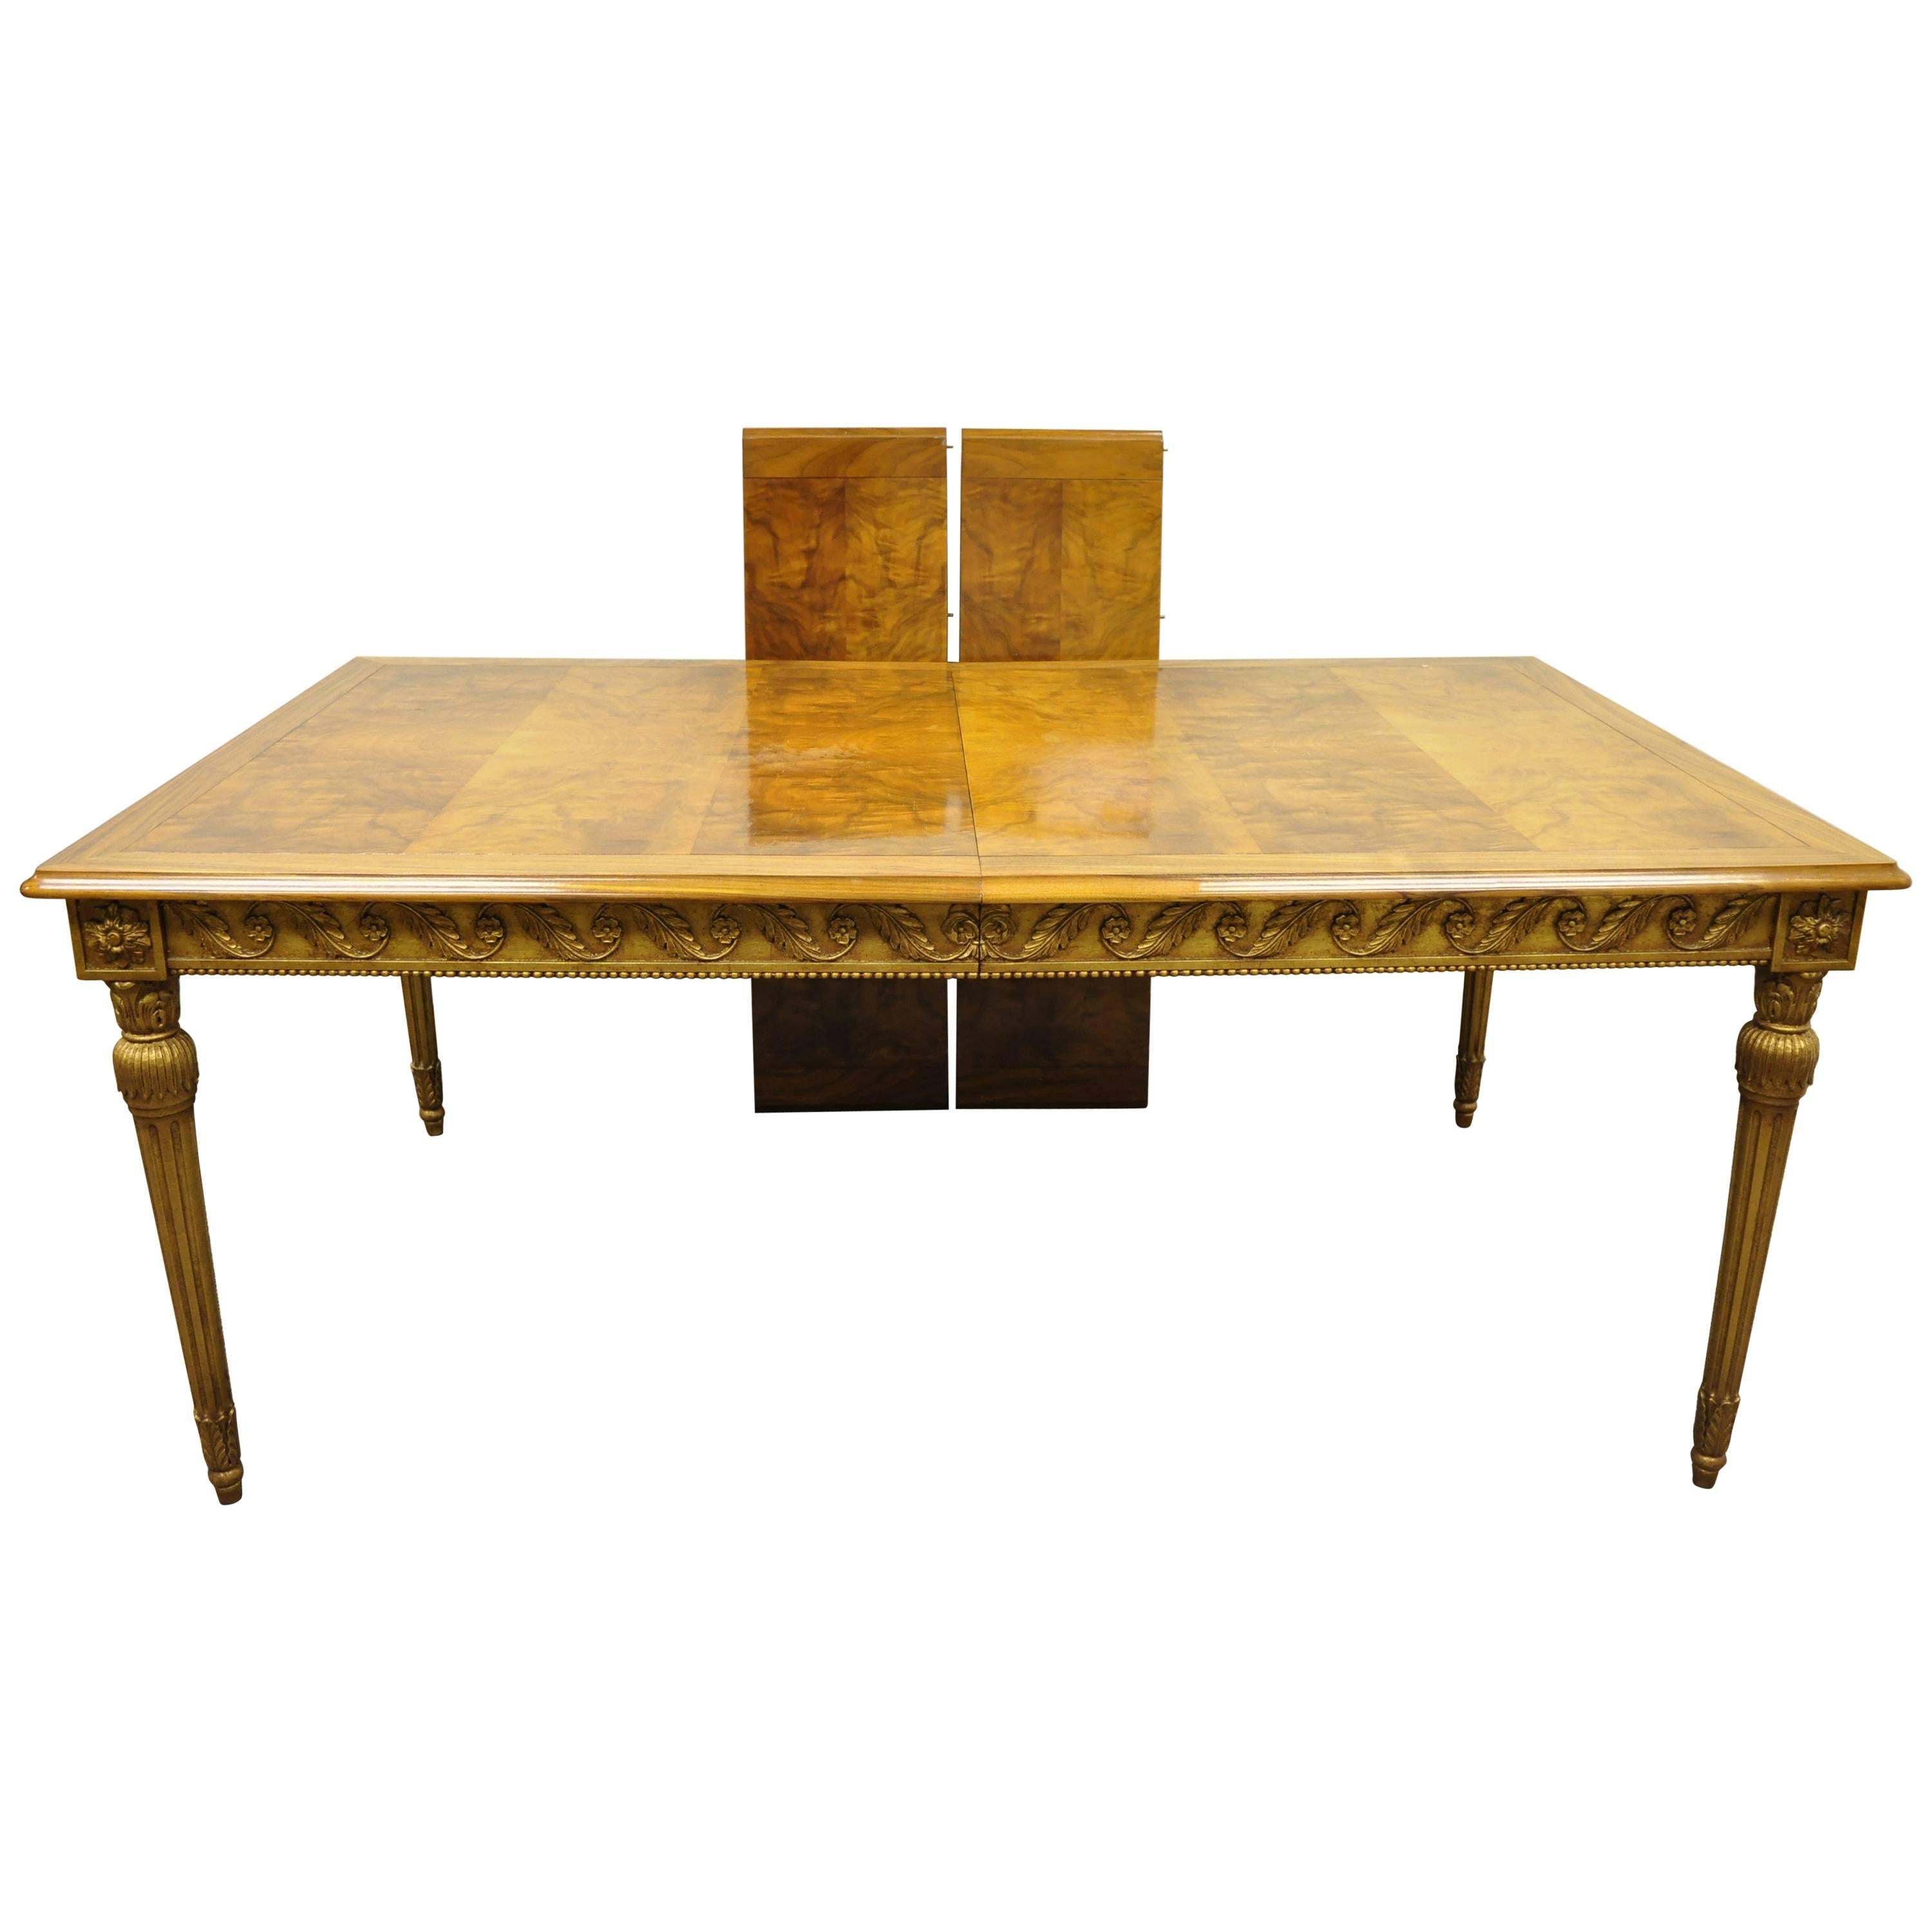 Italian Neoclassical Burl Wood Walnut Gold Giltwood Dining Table with Two Leaves